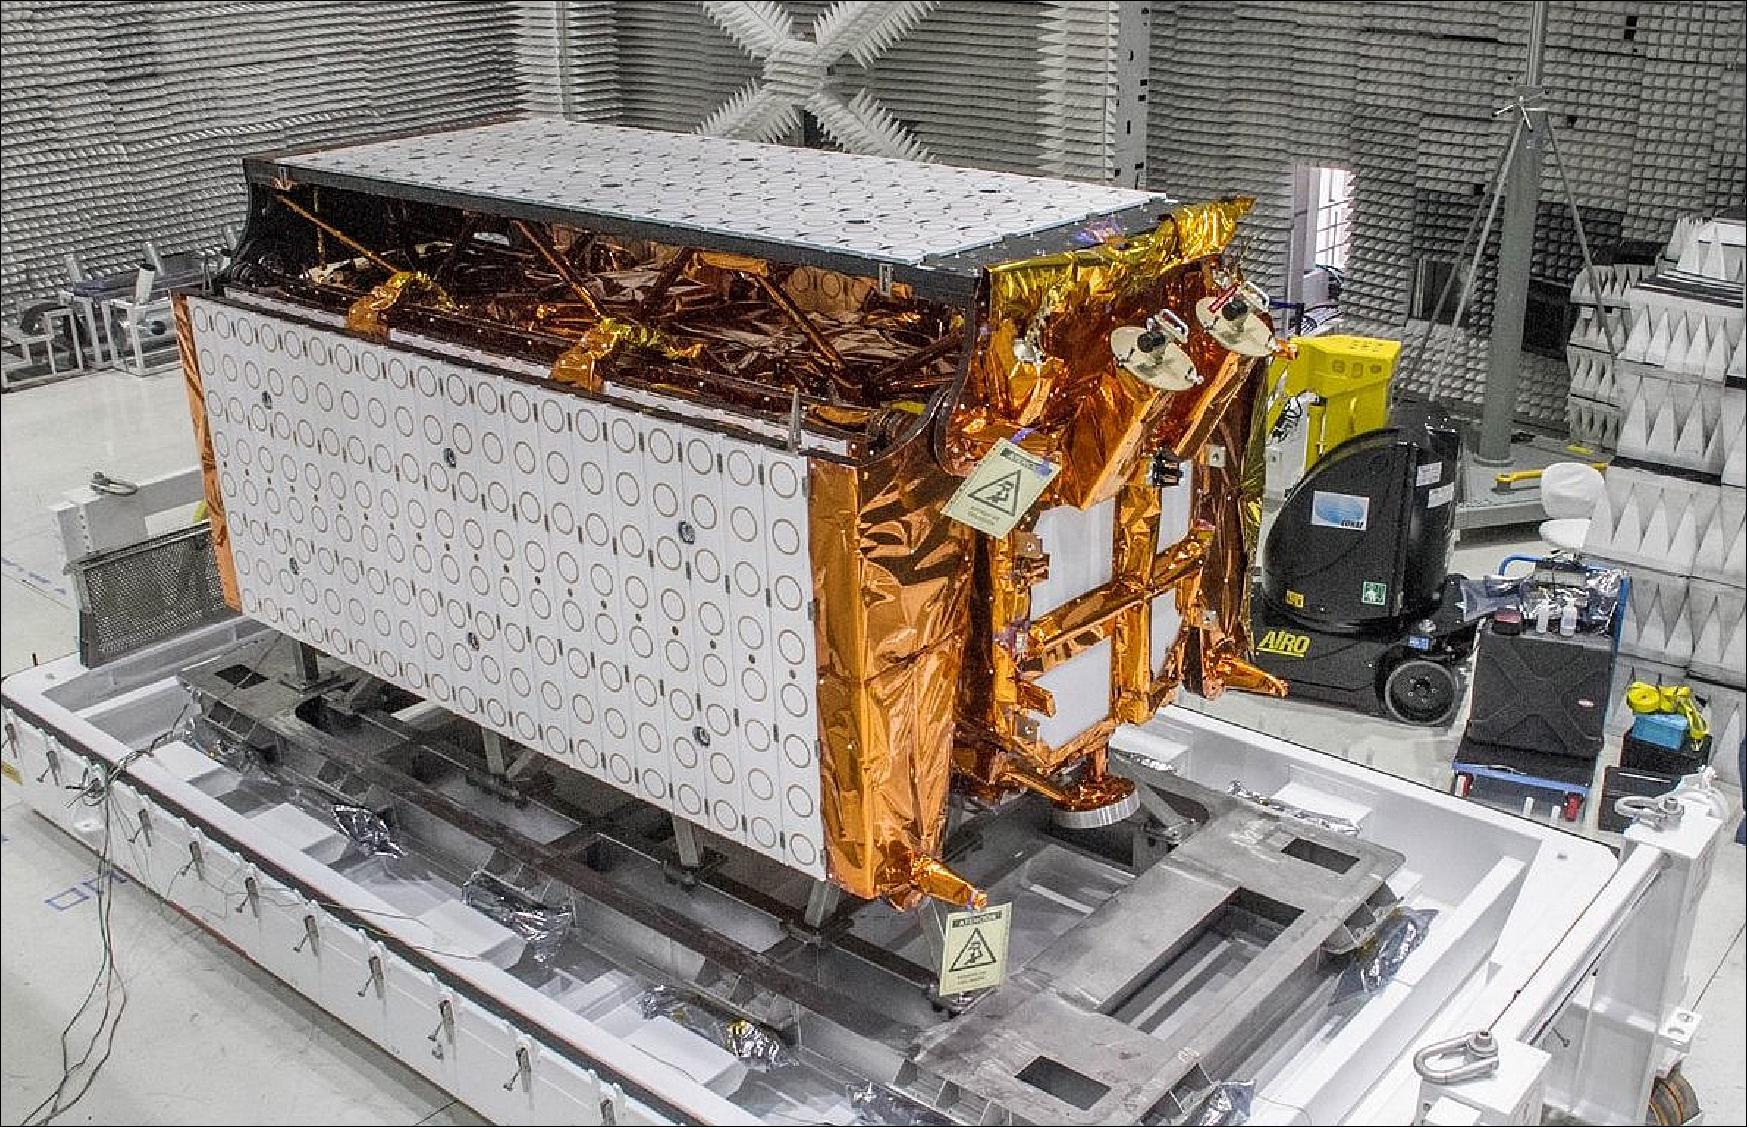 Figure 2: Photo of the SAOCOM-1A spacecraft at VAFB (image credit: CONAE)